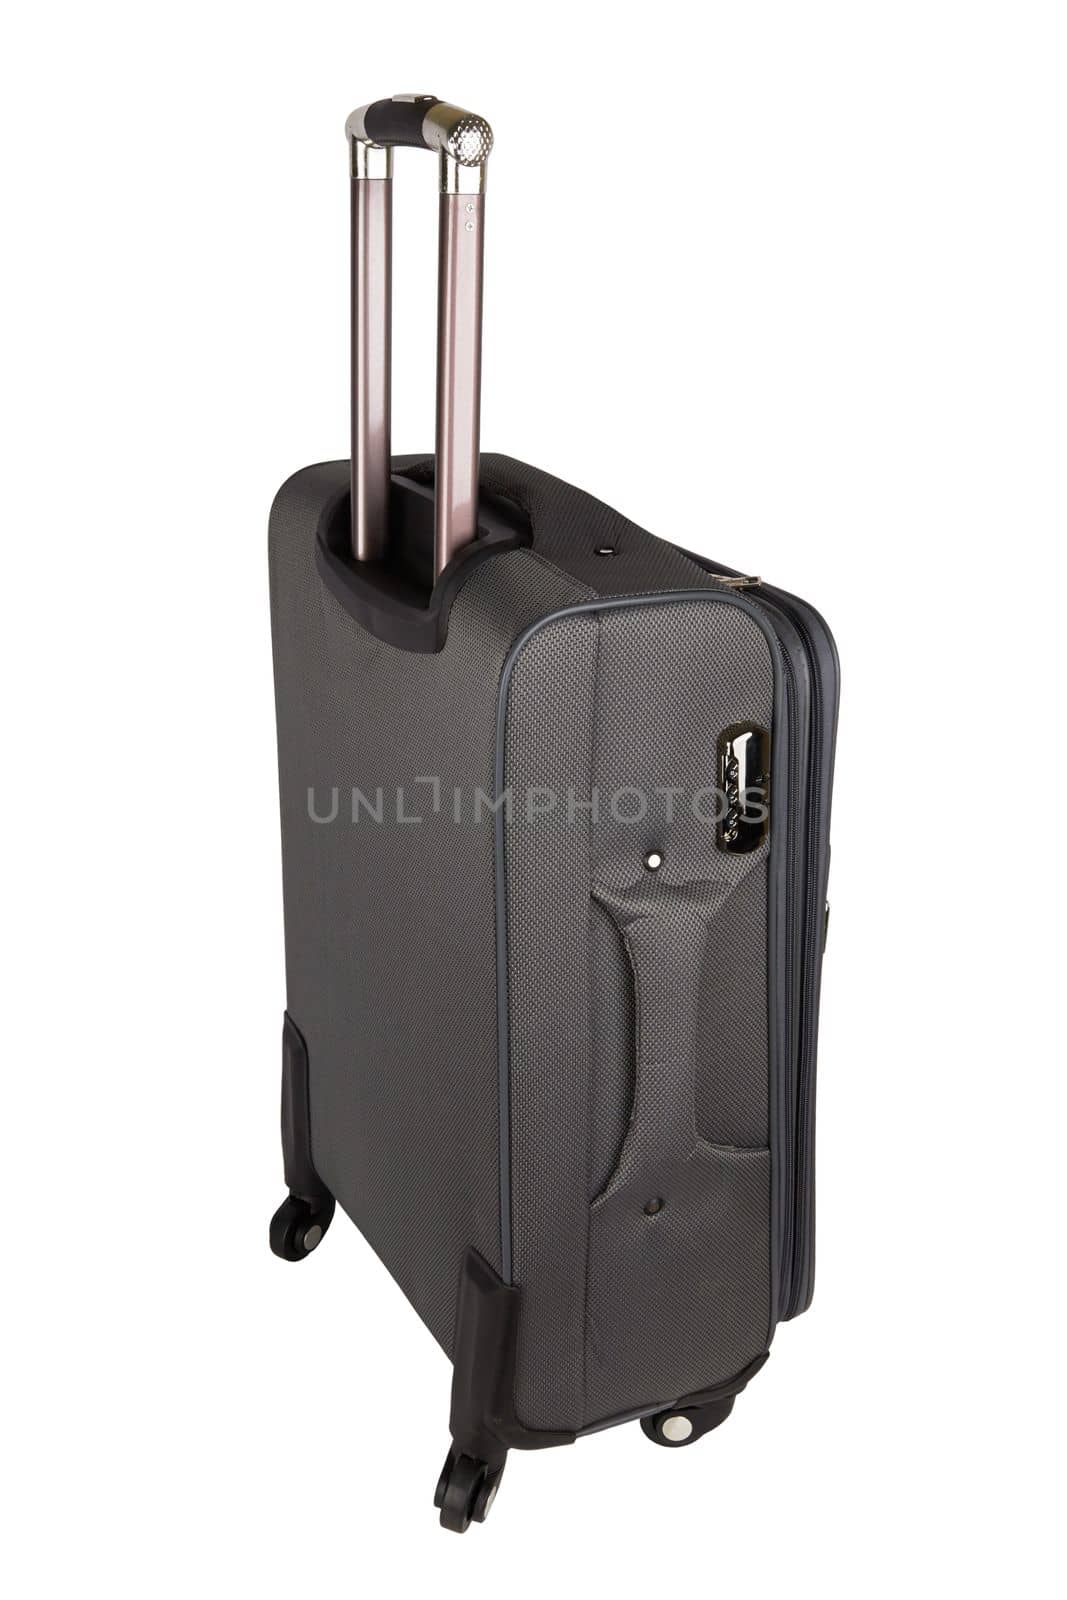 Gray suitcase isolated on a white background